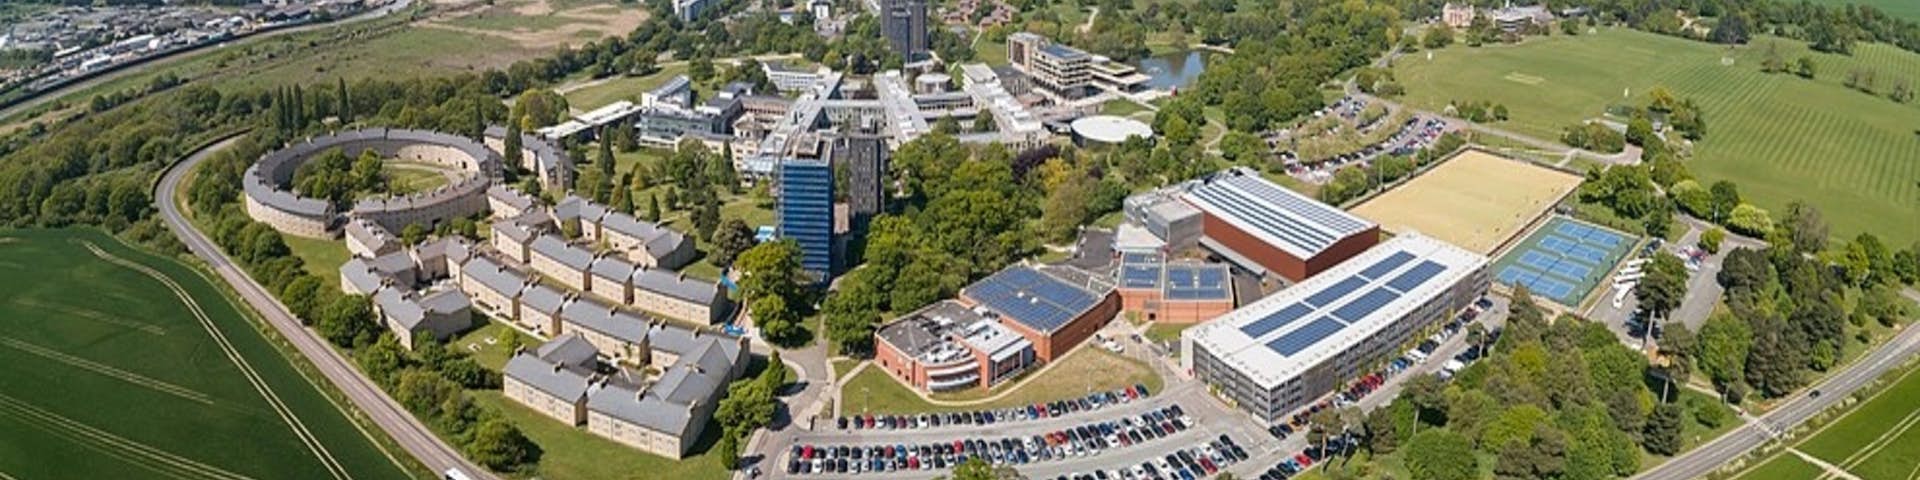 Financial Engineering and Risk Management at University of Essex 